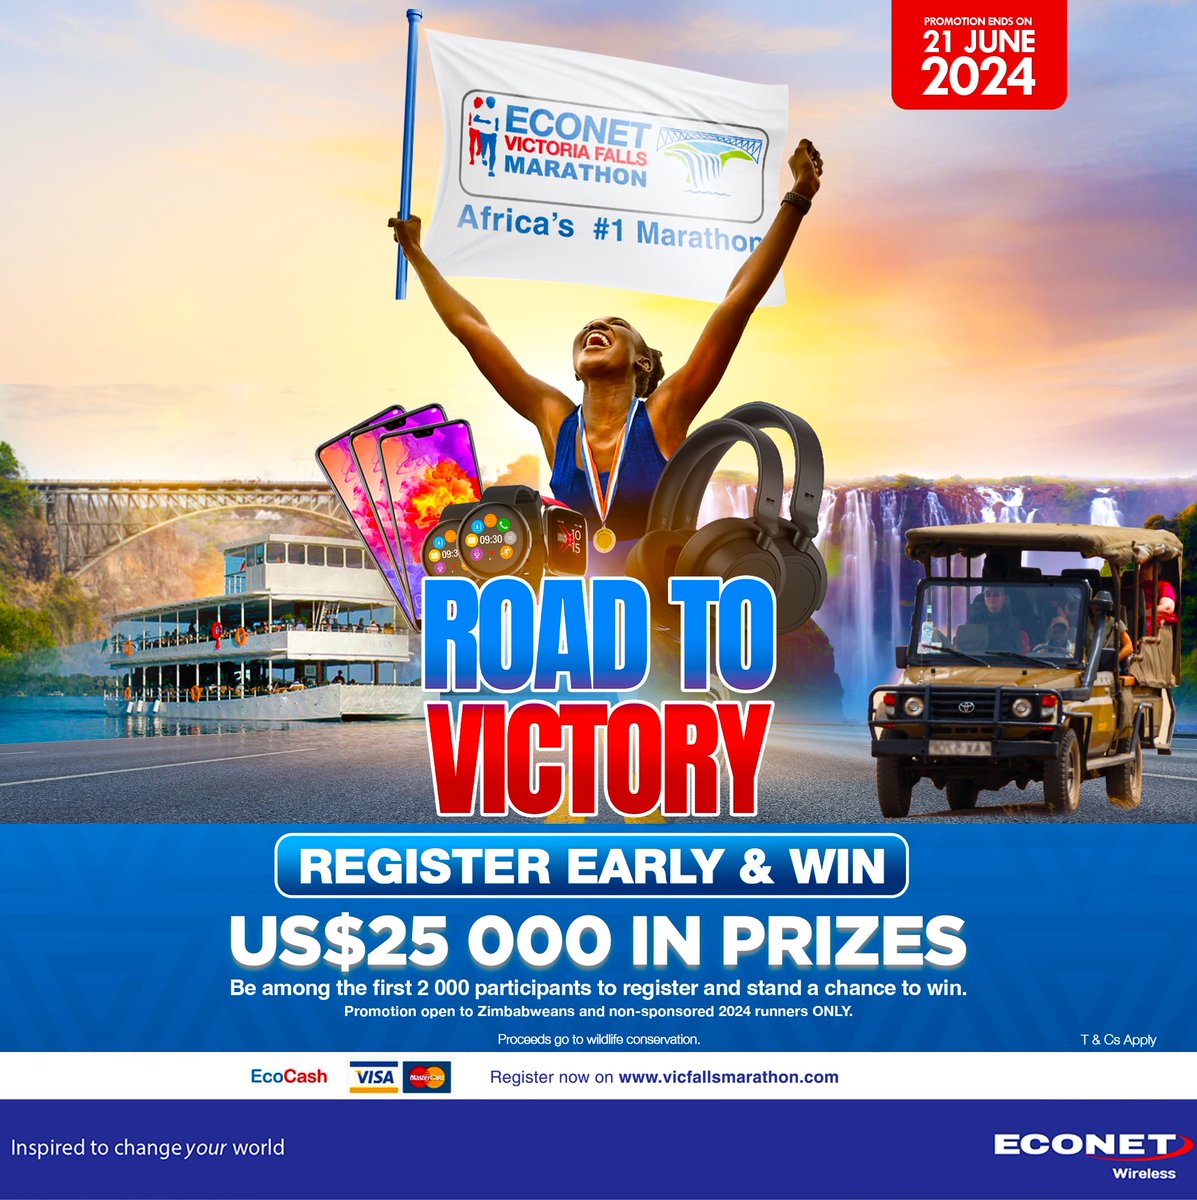 #EVFM2024 Register early and win. Be among the first 2000 participants to register and stand a chance to win. Visit: vicfallsmarathon.com to register. #EVFM2024